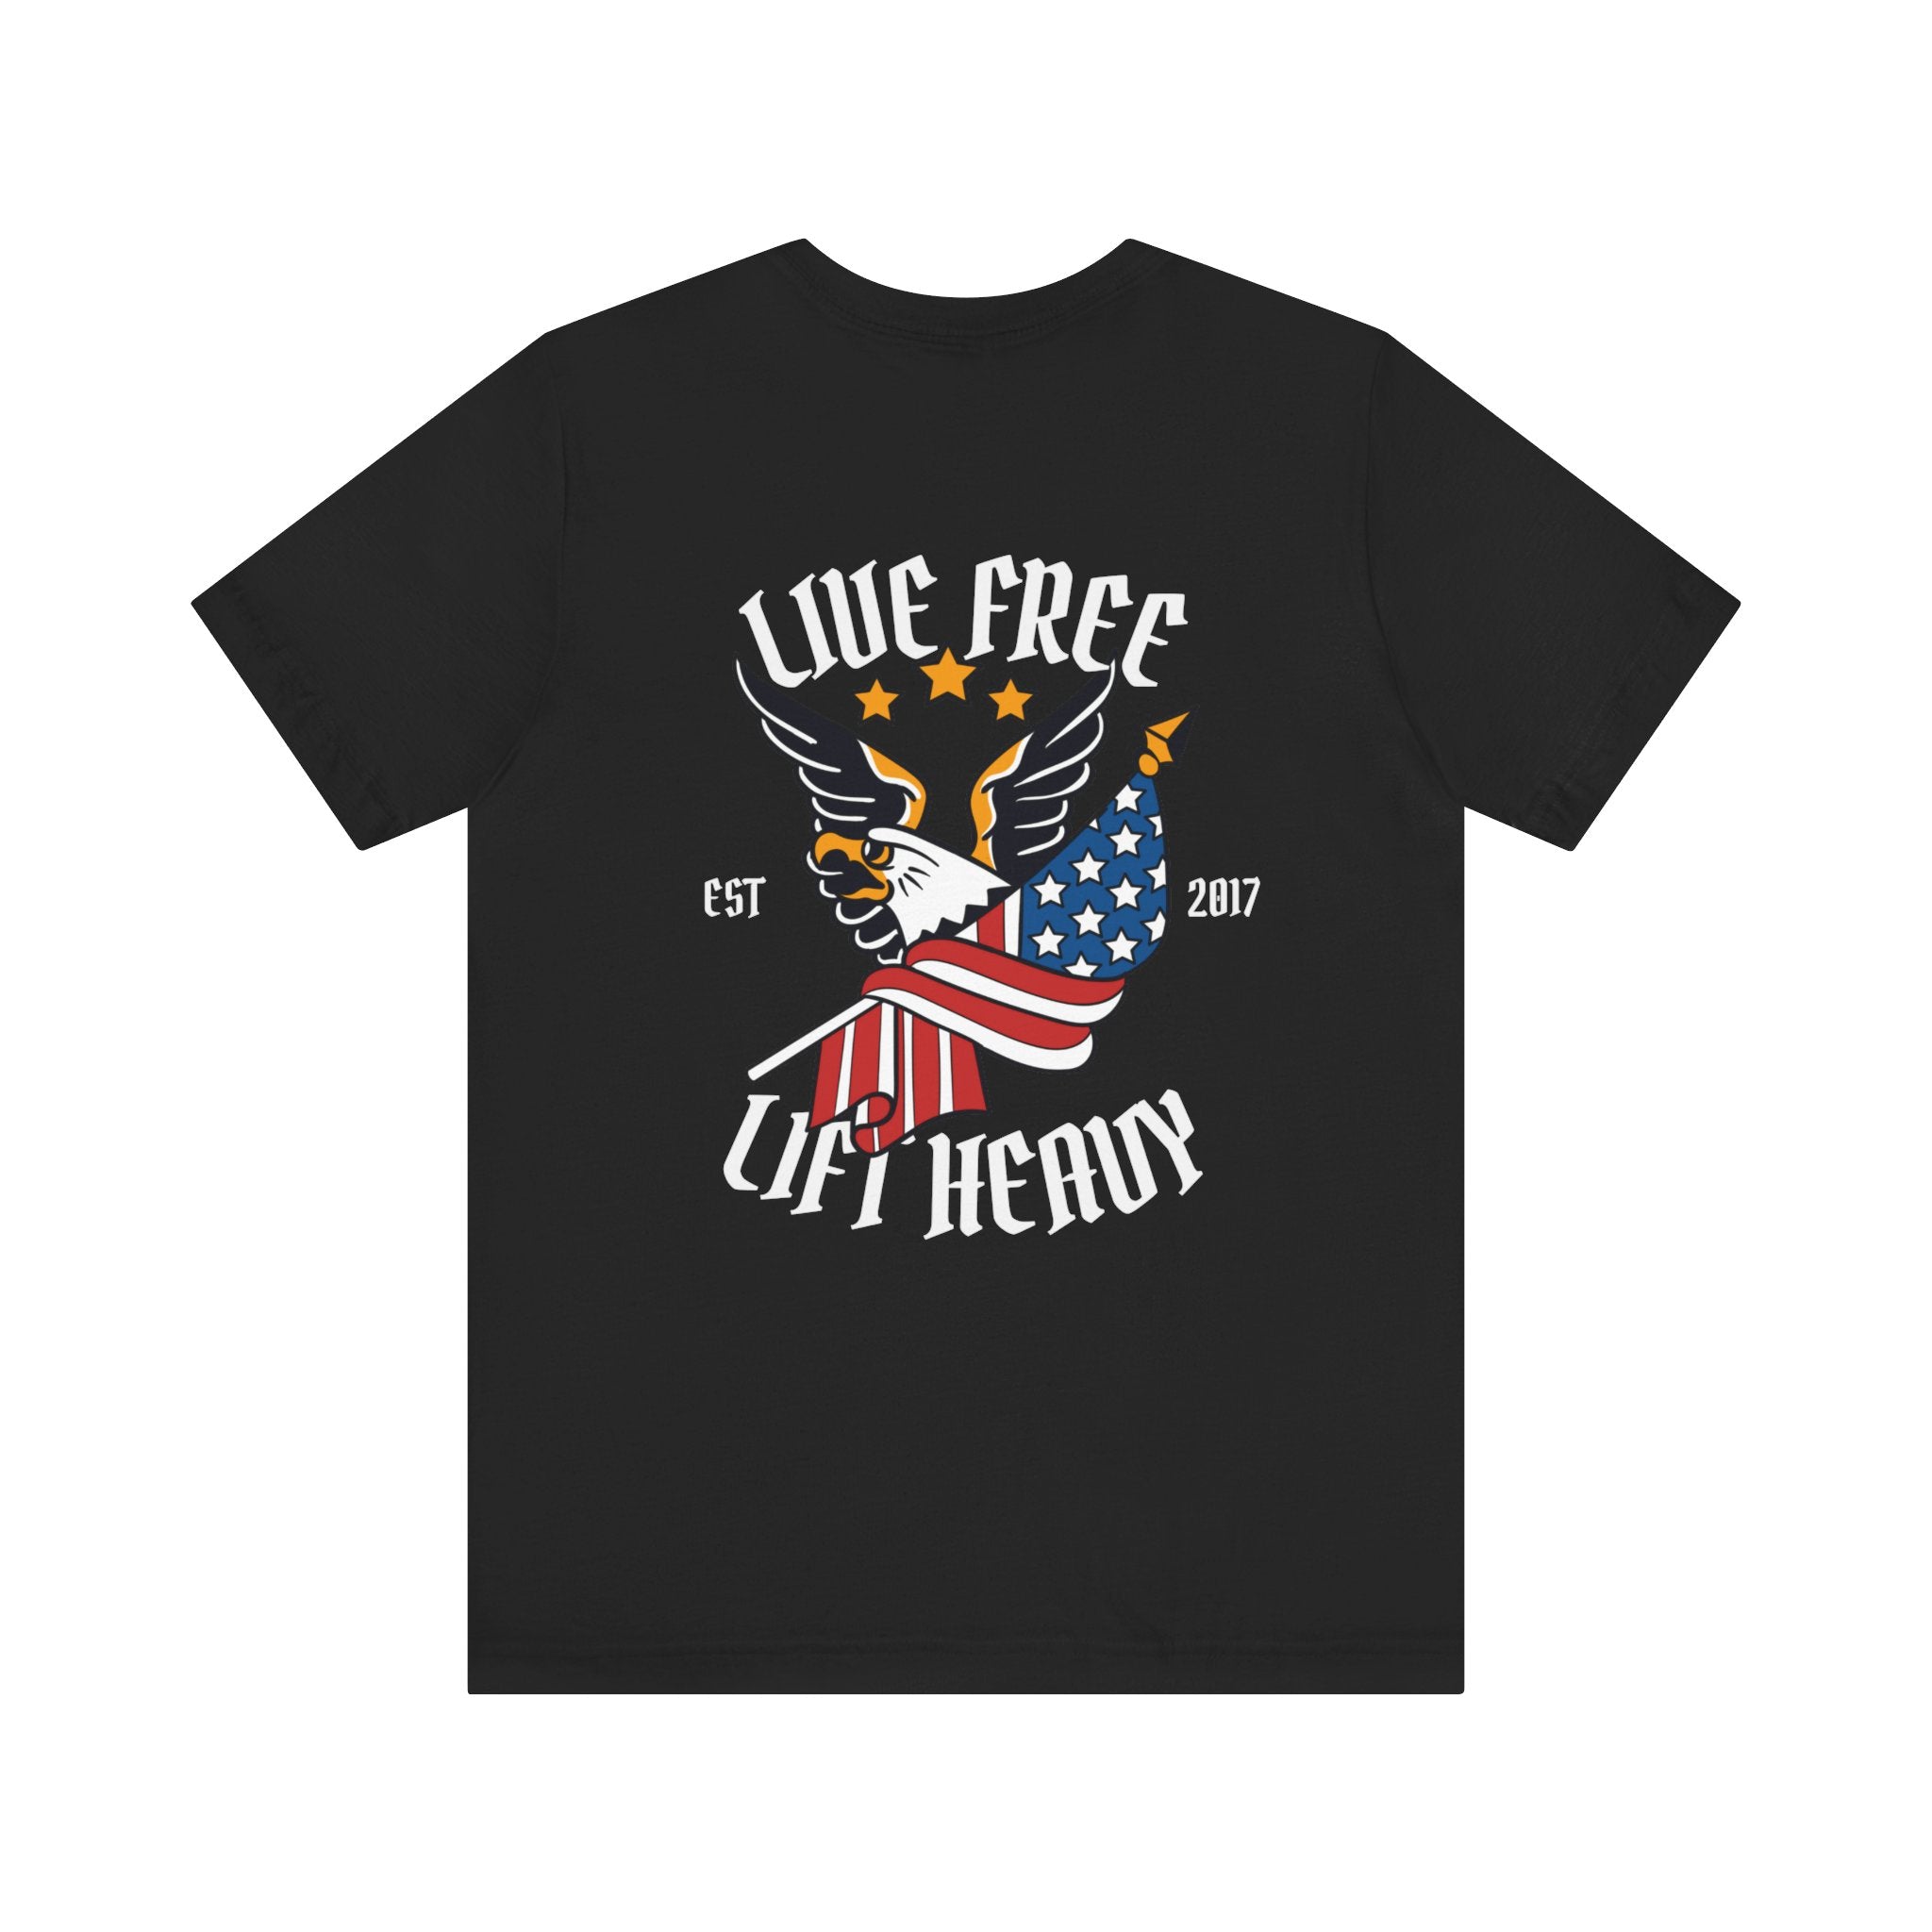 Men's "Live Free. Lift Heavy" Limited Edition t-shirt